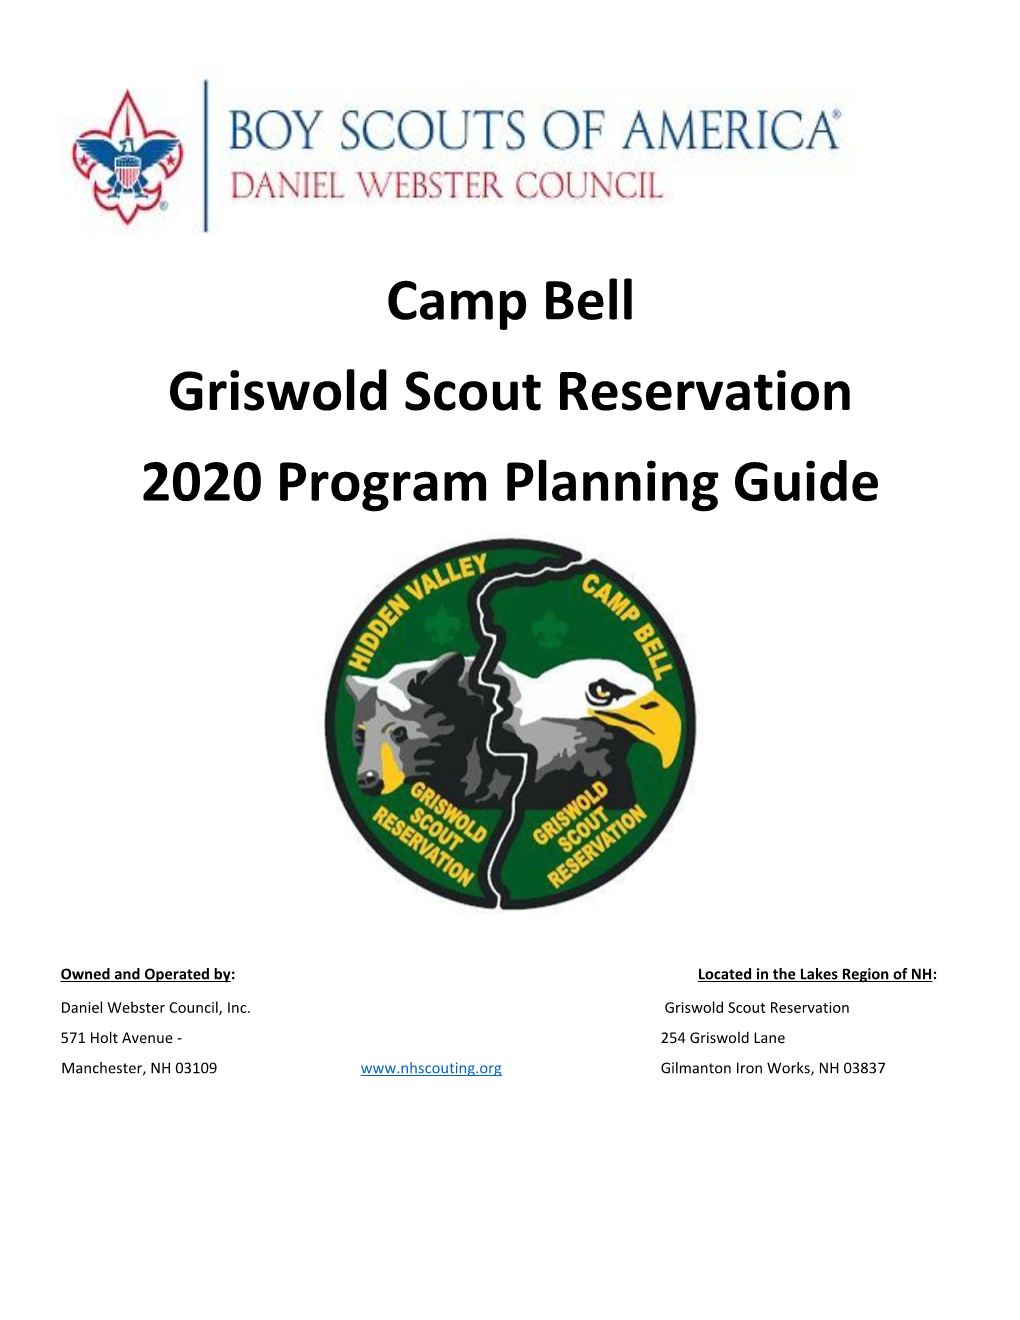 Camp Bell Griswold Scout Reservation 2020 Program Planning Guide